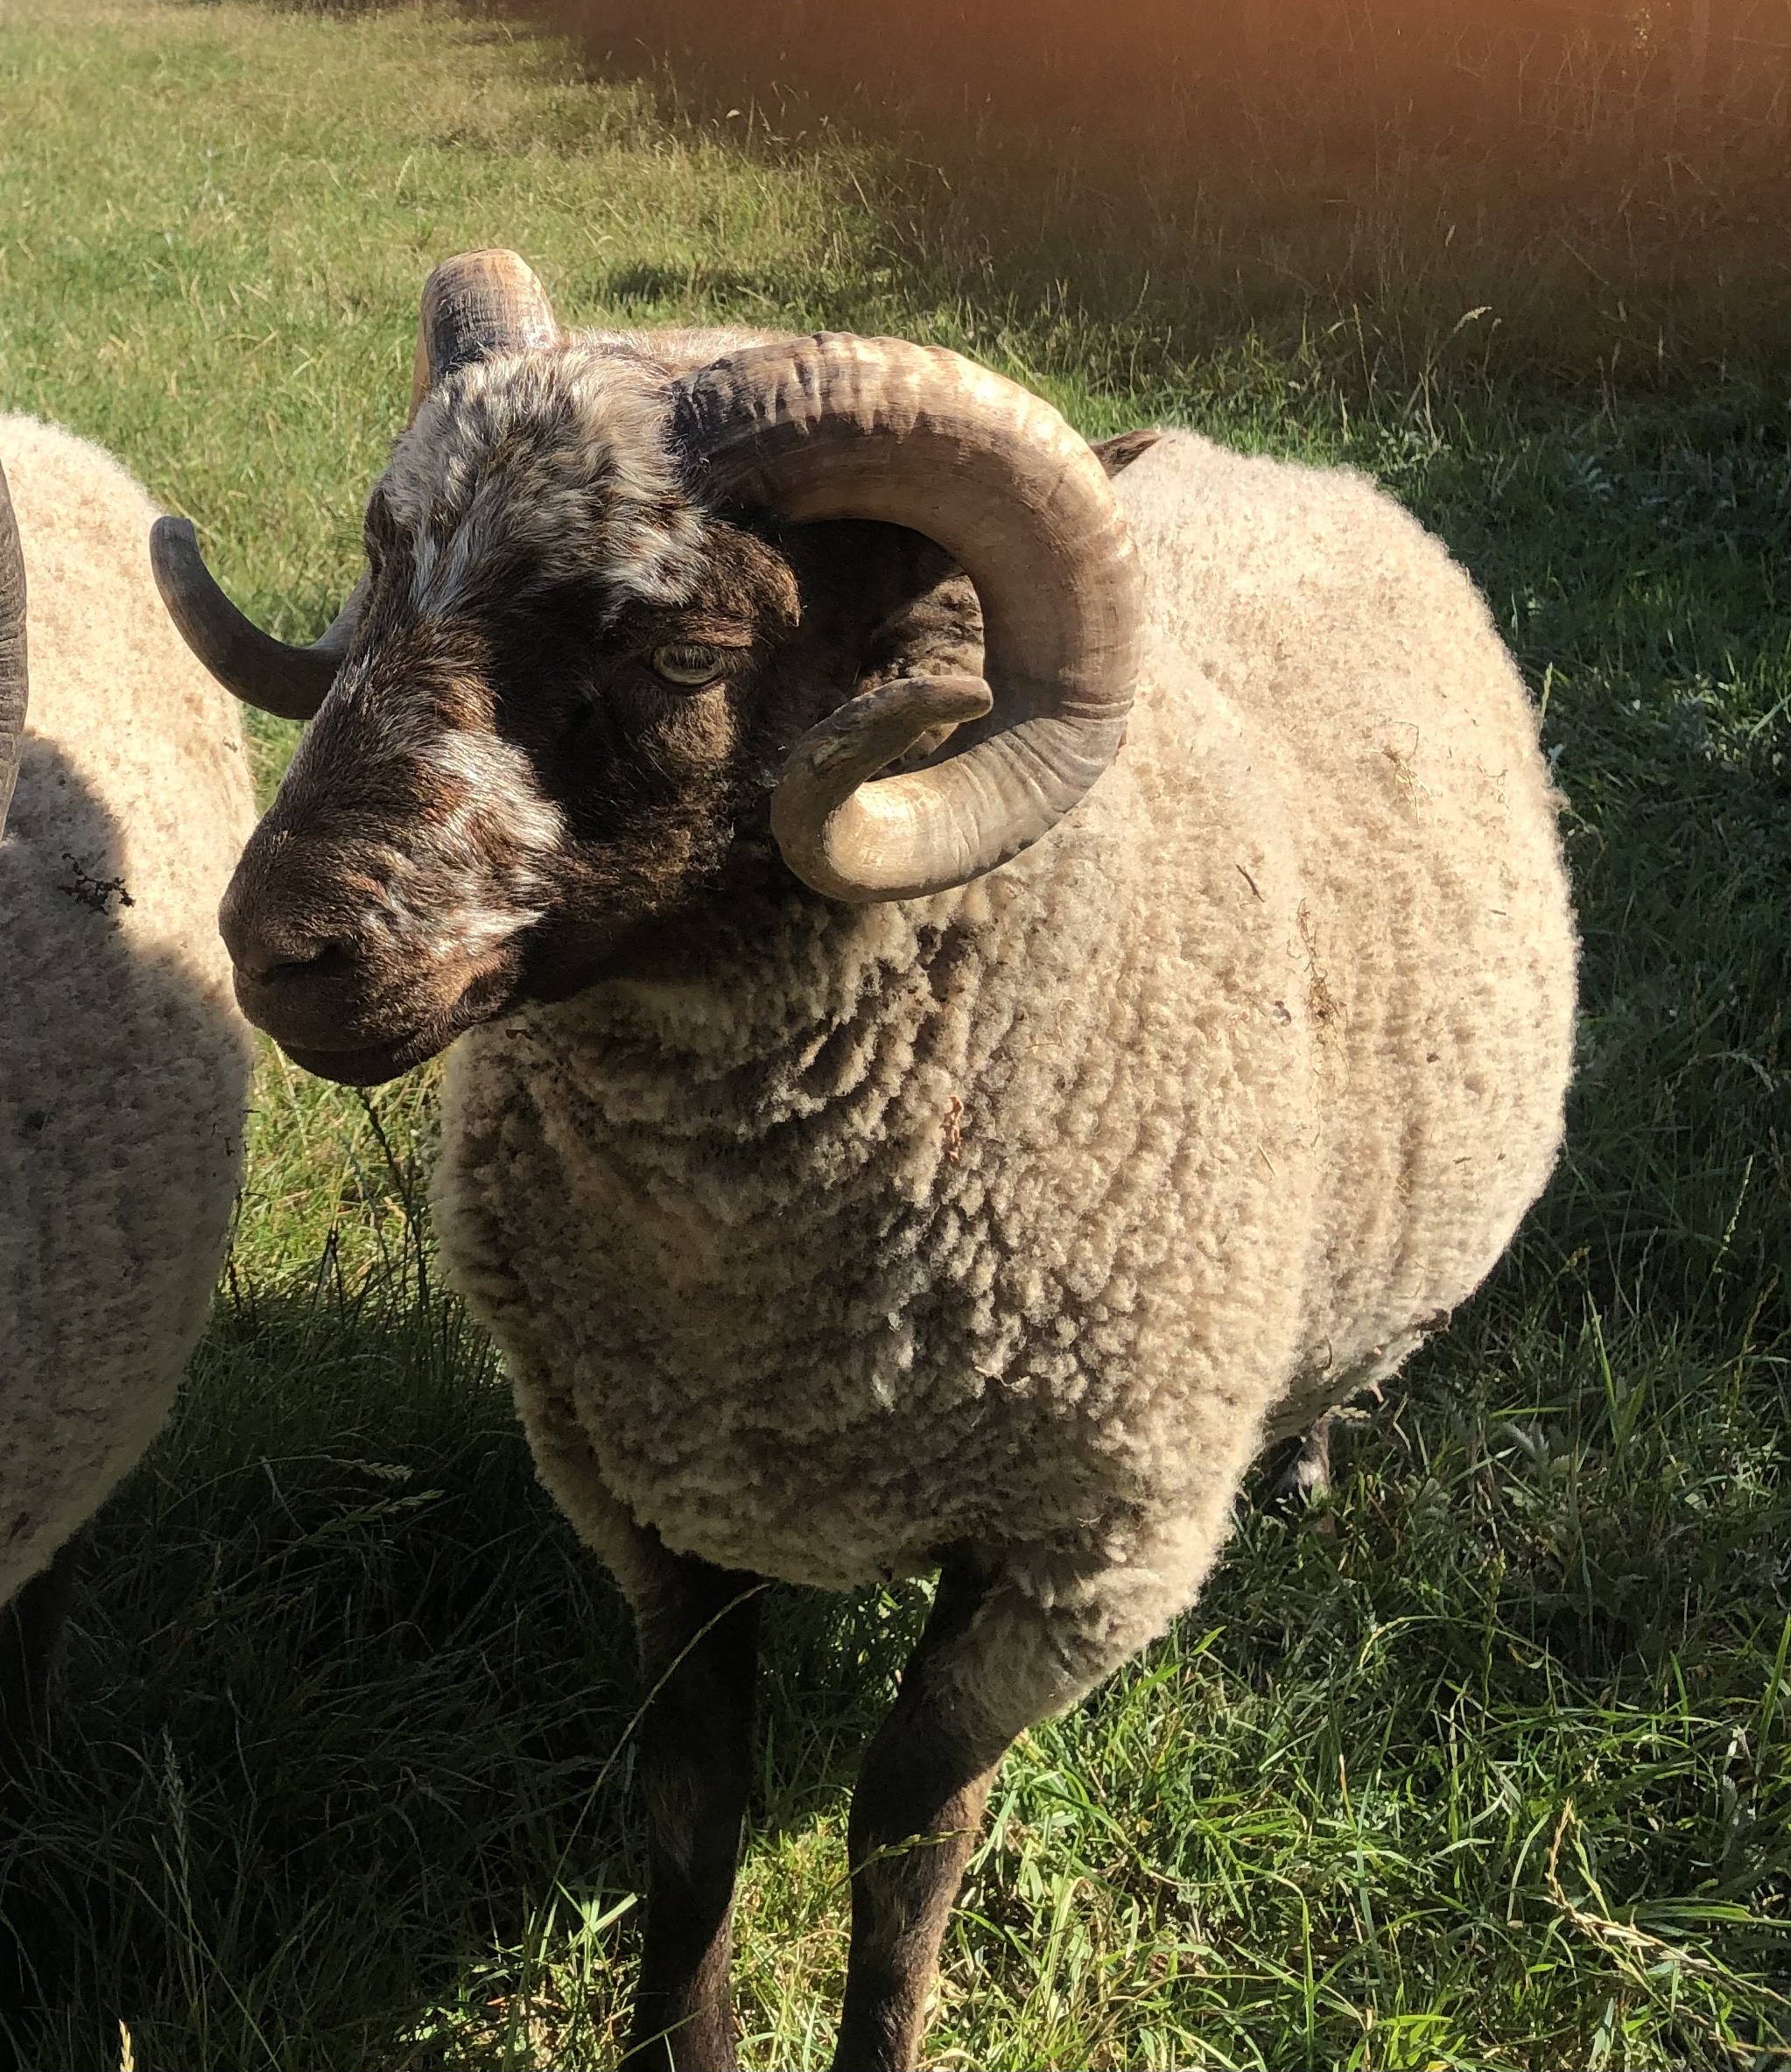 For Sale Shearling Ram